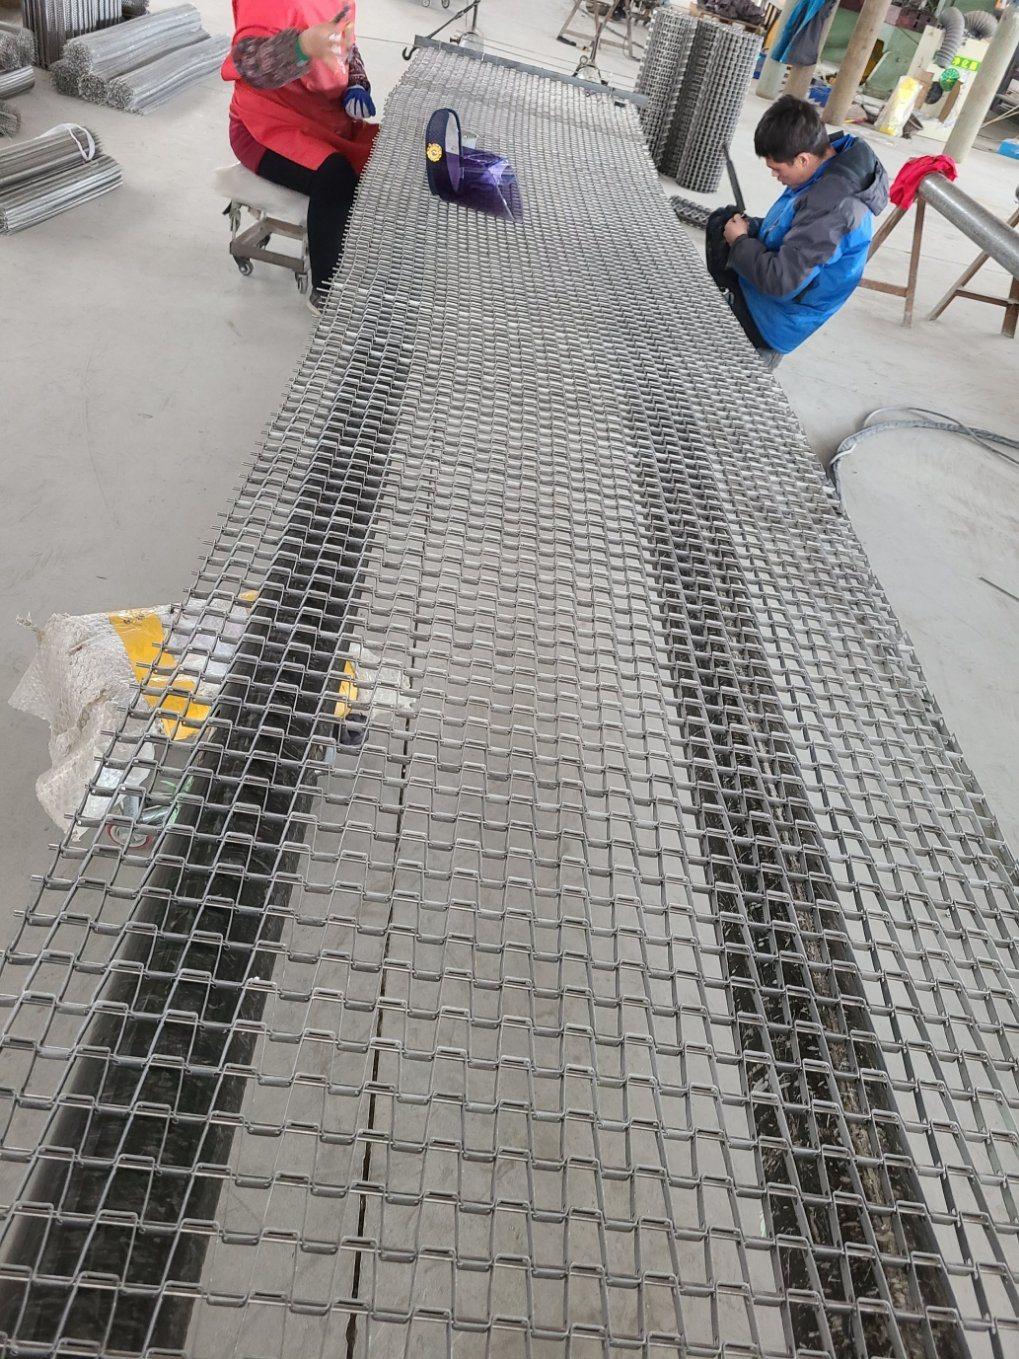 316 Stainless Steel Braided Wire Mesh Filter Belt for Extruder Conveyor Belt Polyester Fabric